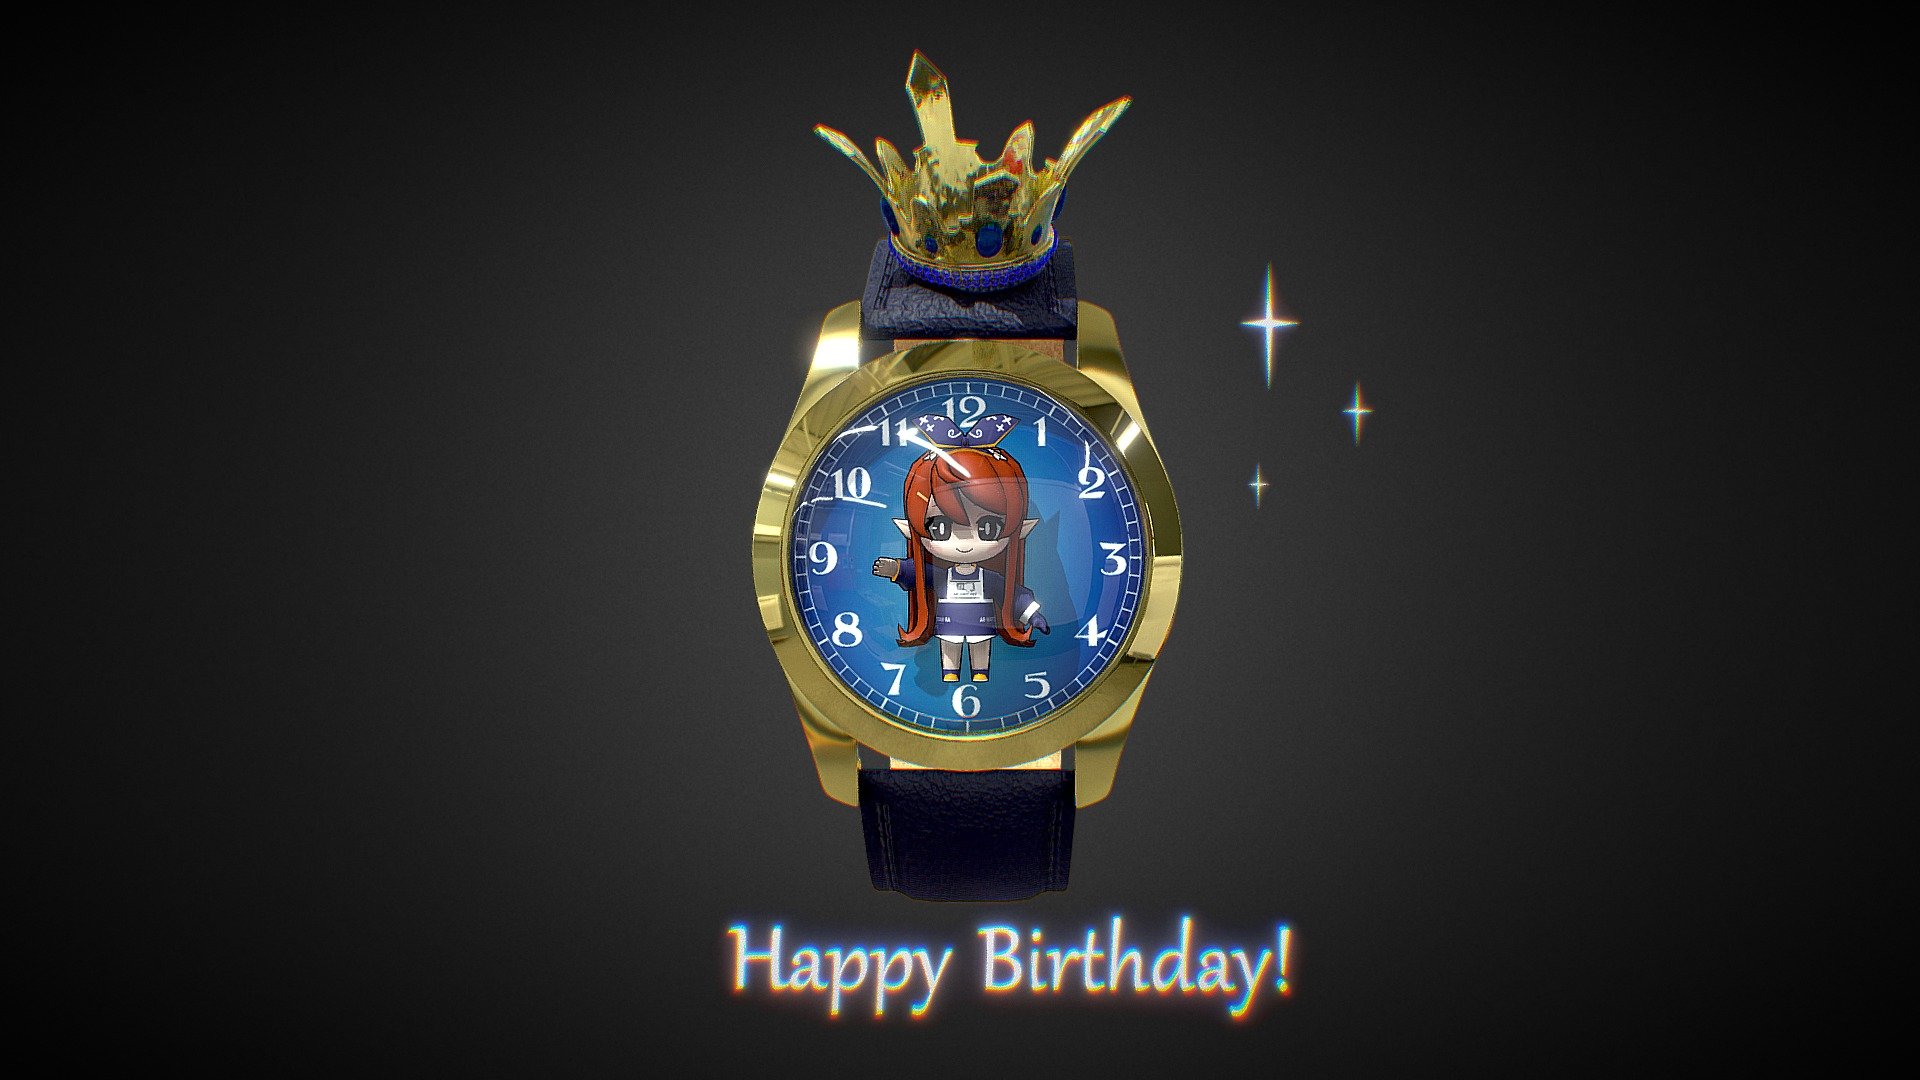 Dear Ishkhanuhi,

Hope your special day brings you all that your heart desires! Here’s wishing you a day full of pleasant surprises! Happy birthday!

Love,

Your AR-Watches team! - B-day Watch for AR-Watches Ishkhanuhi - 3D model by ar-watches 3d model